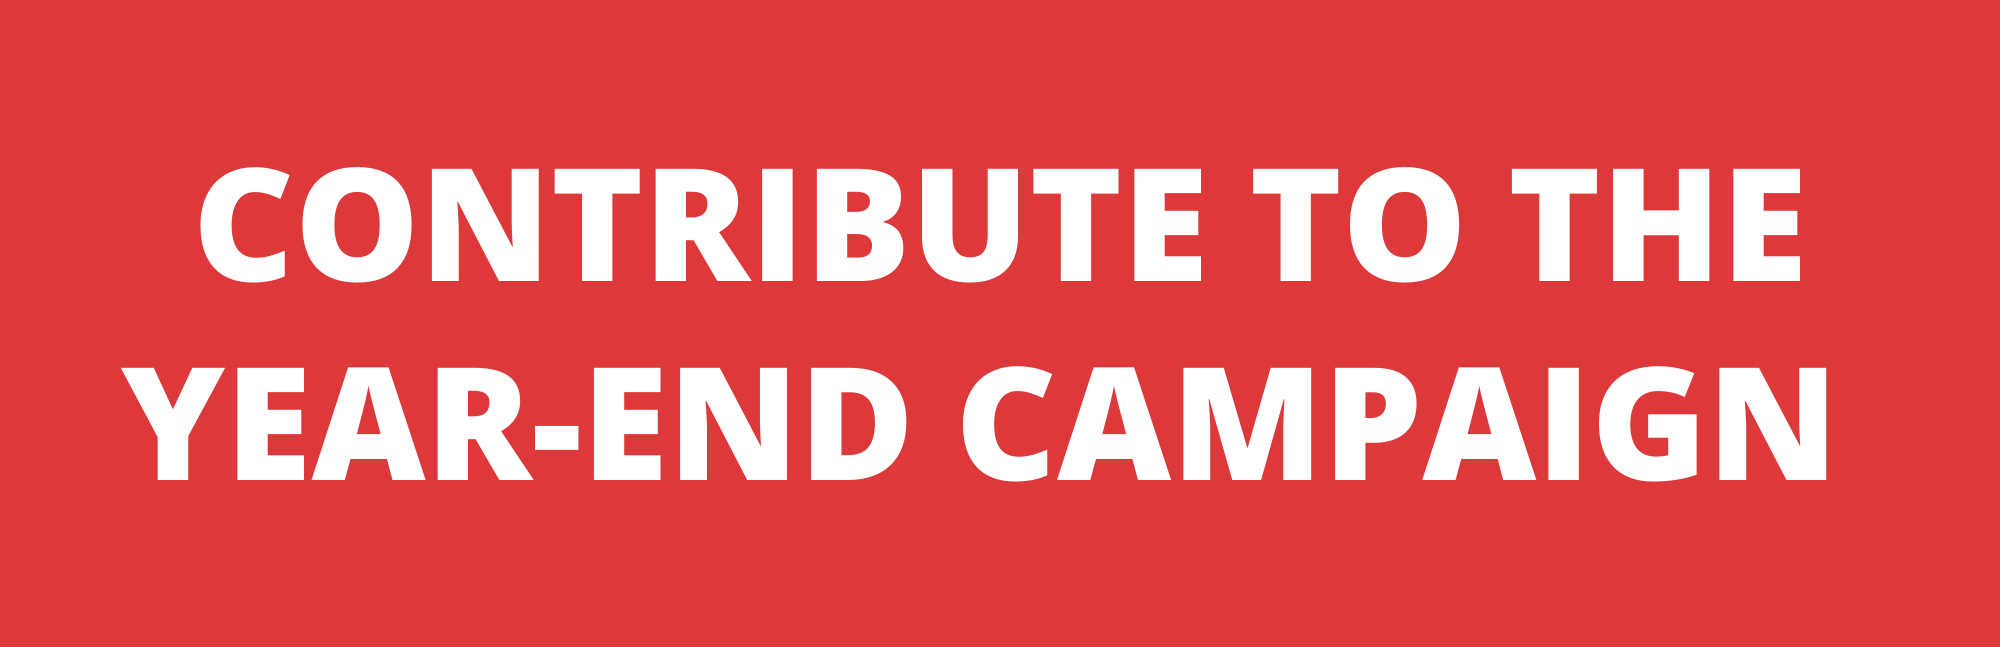 Contribute to the Year-End Campaign